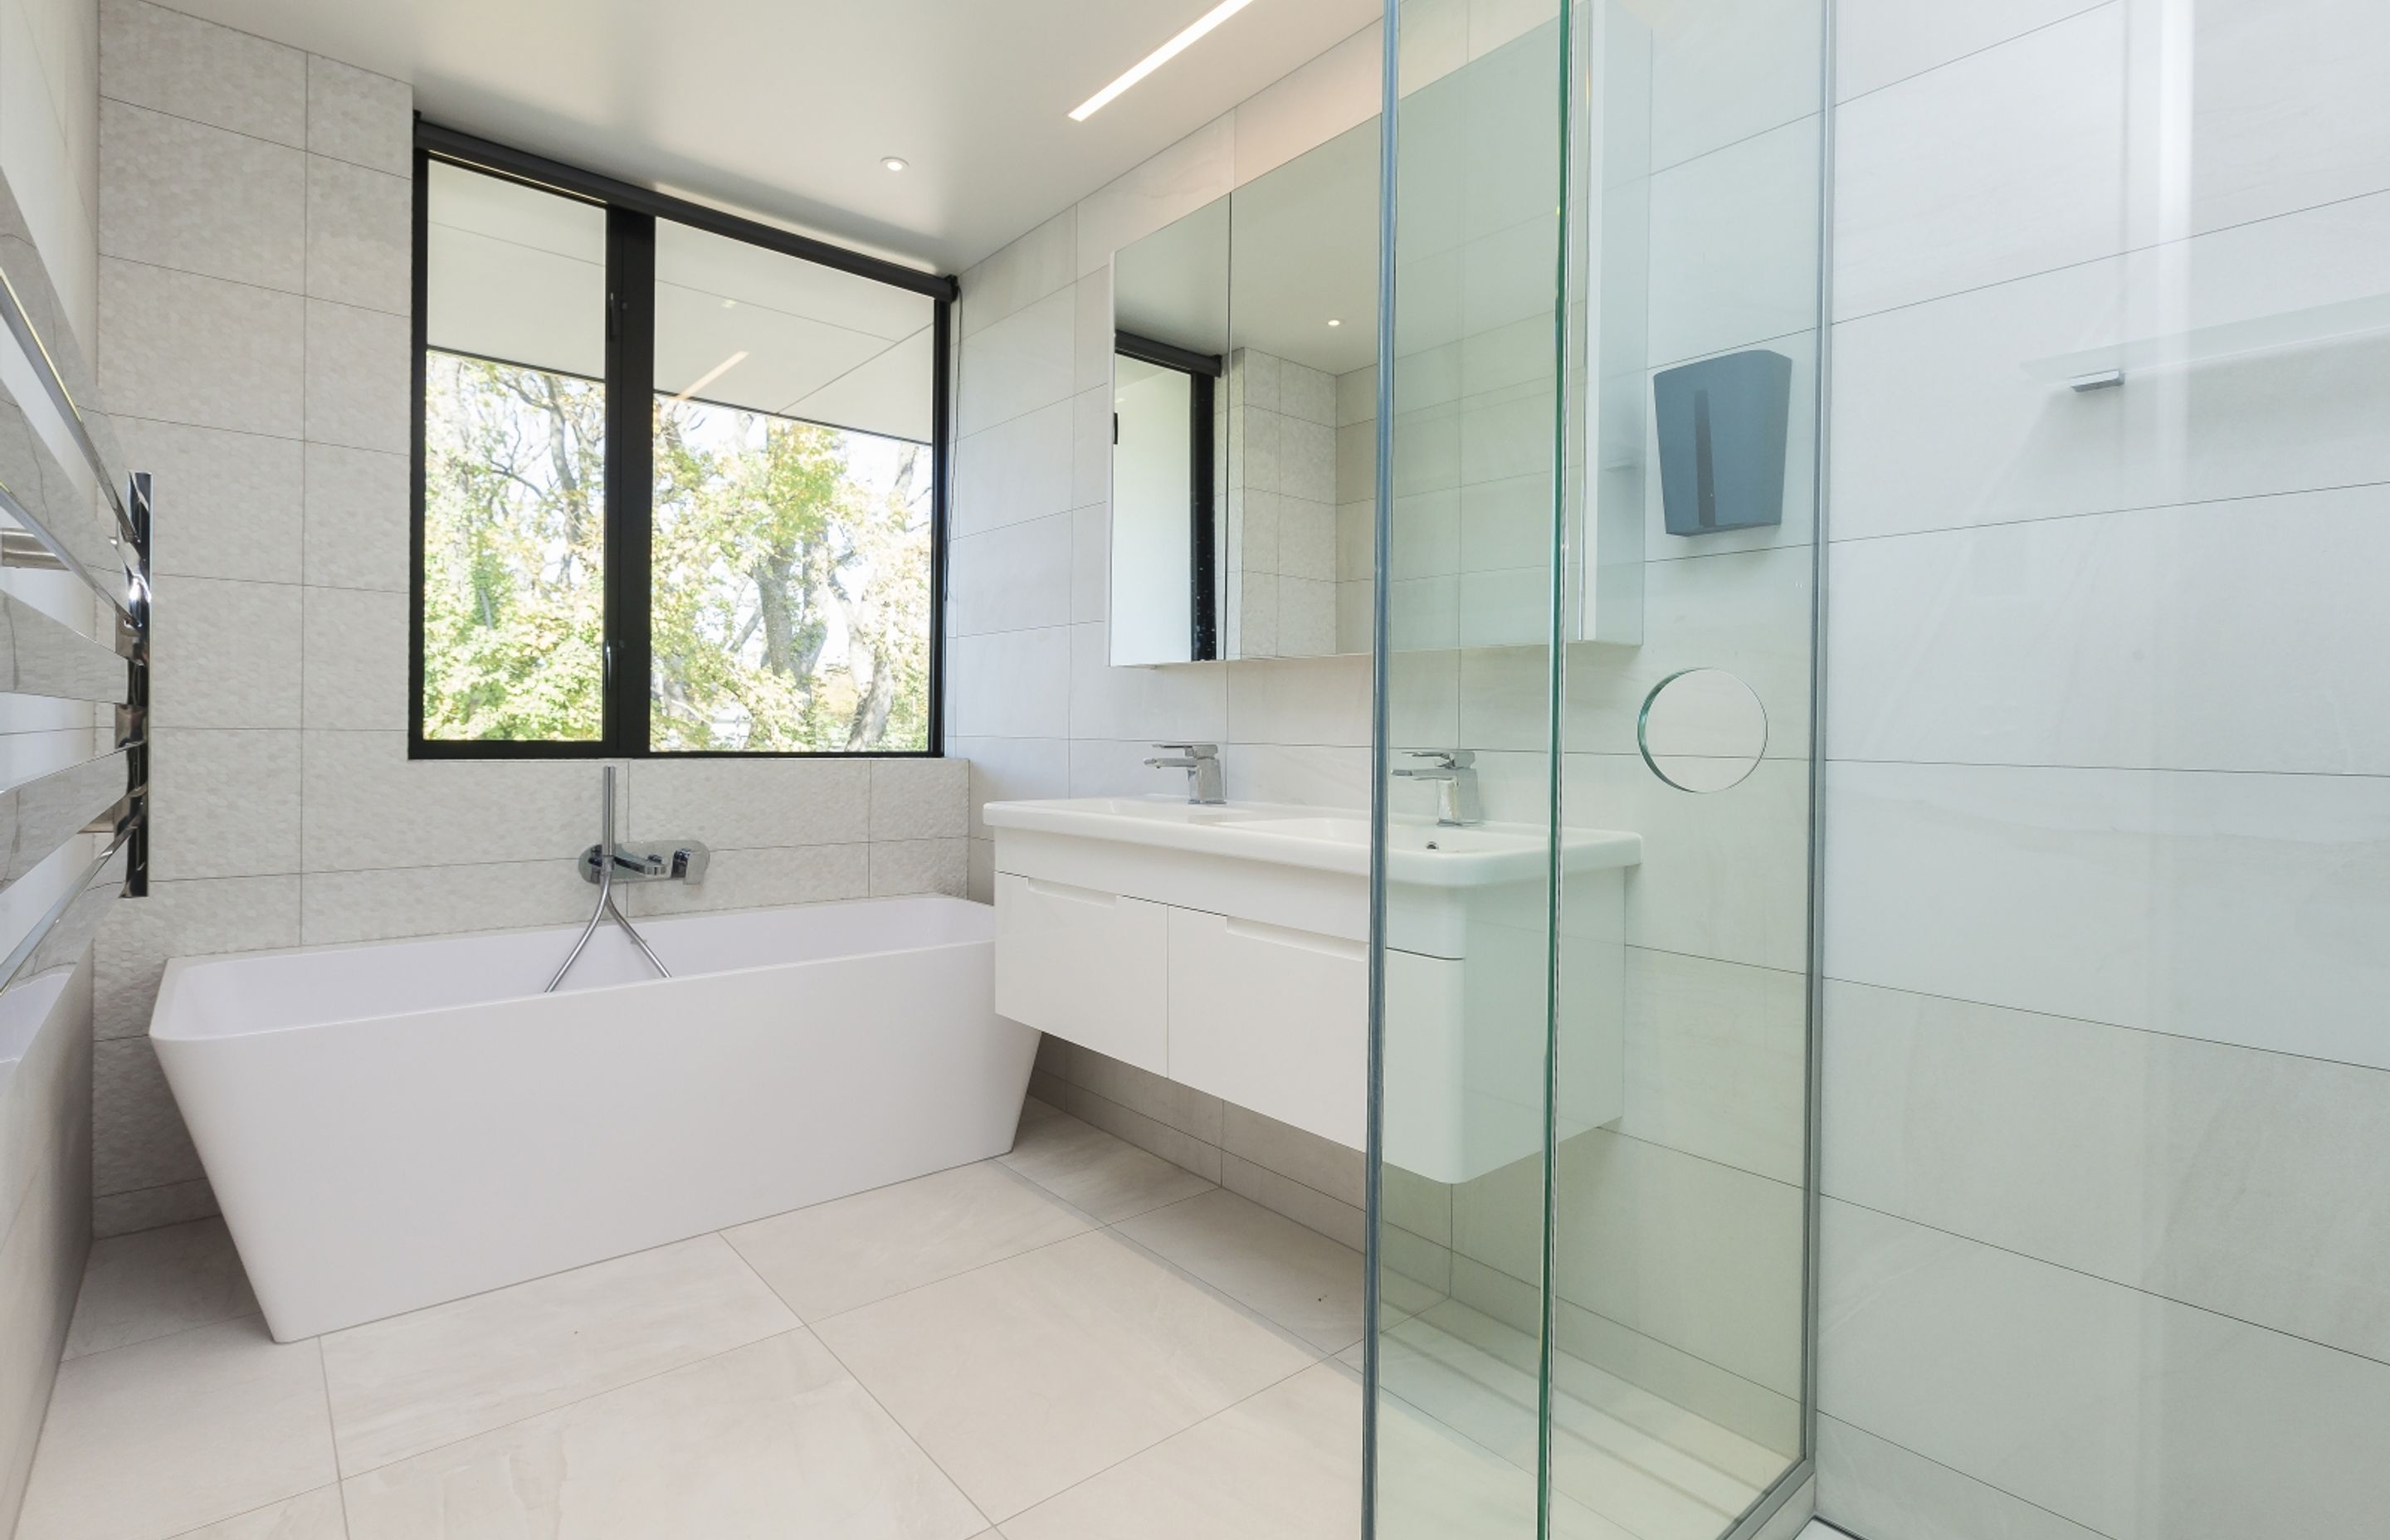 The guest bathroom features an all-white scheme for a light, bright and airy feel.